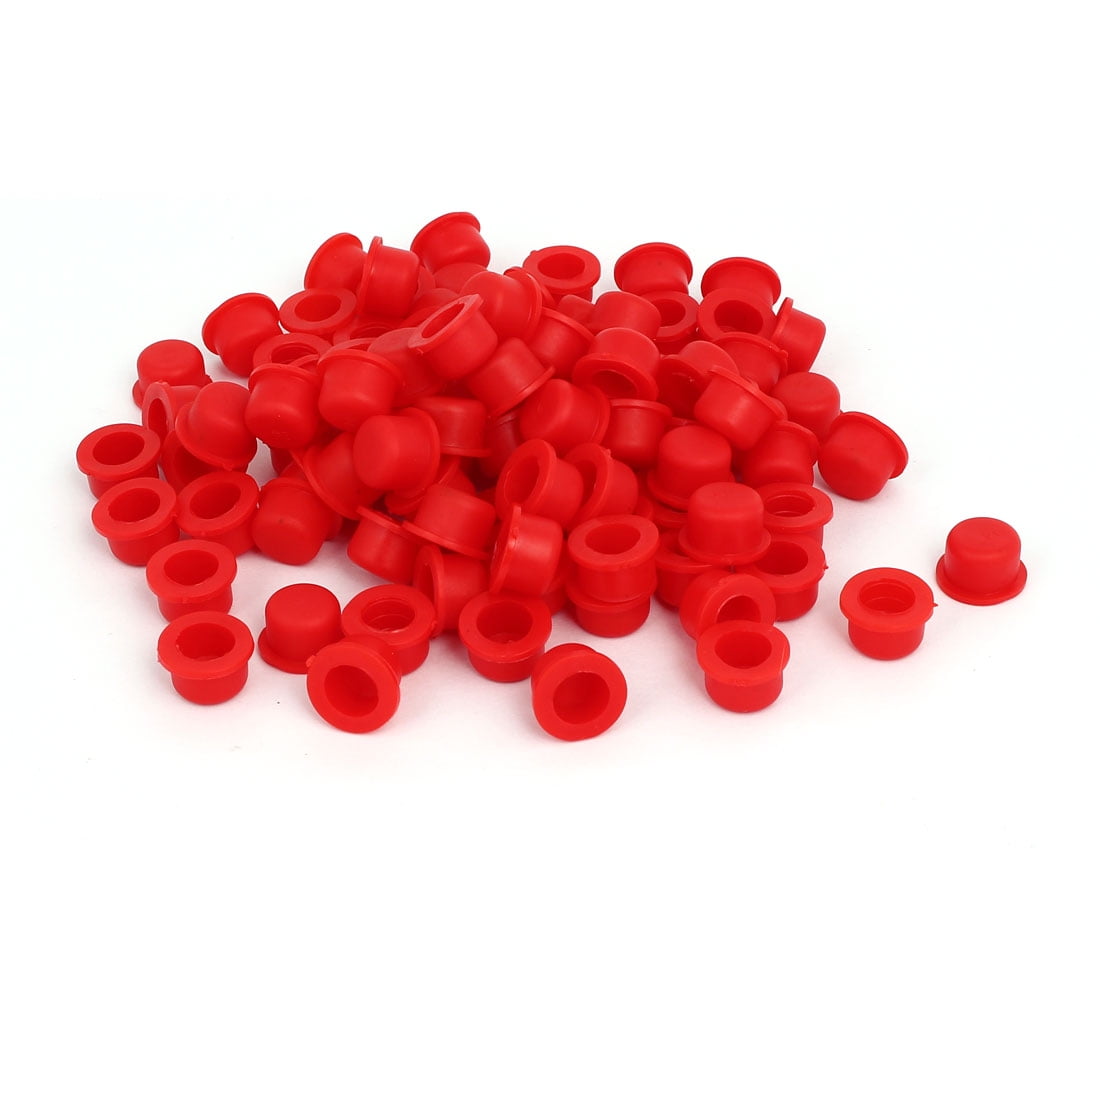 DR M12 Flange Mounted Tapered Caps Stoppers Tube End Insert Red 100pcs